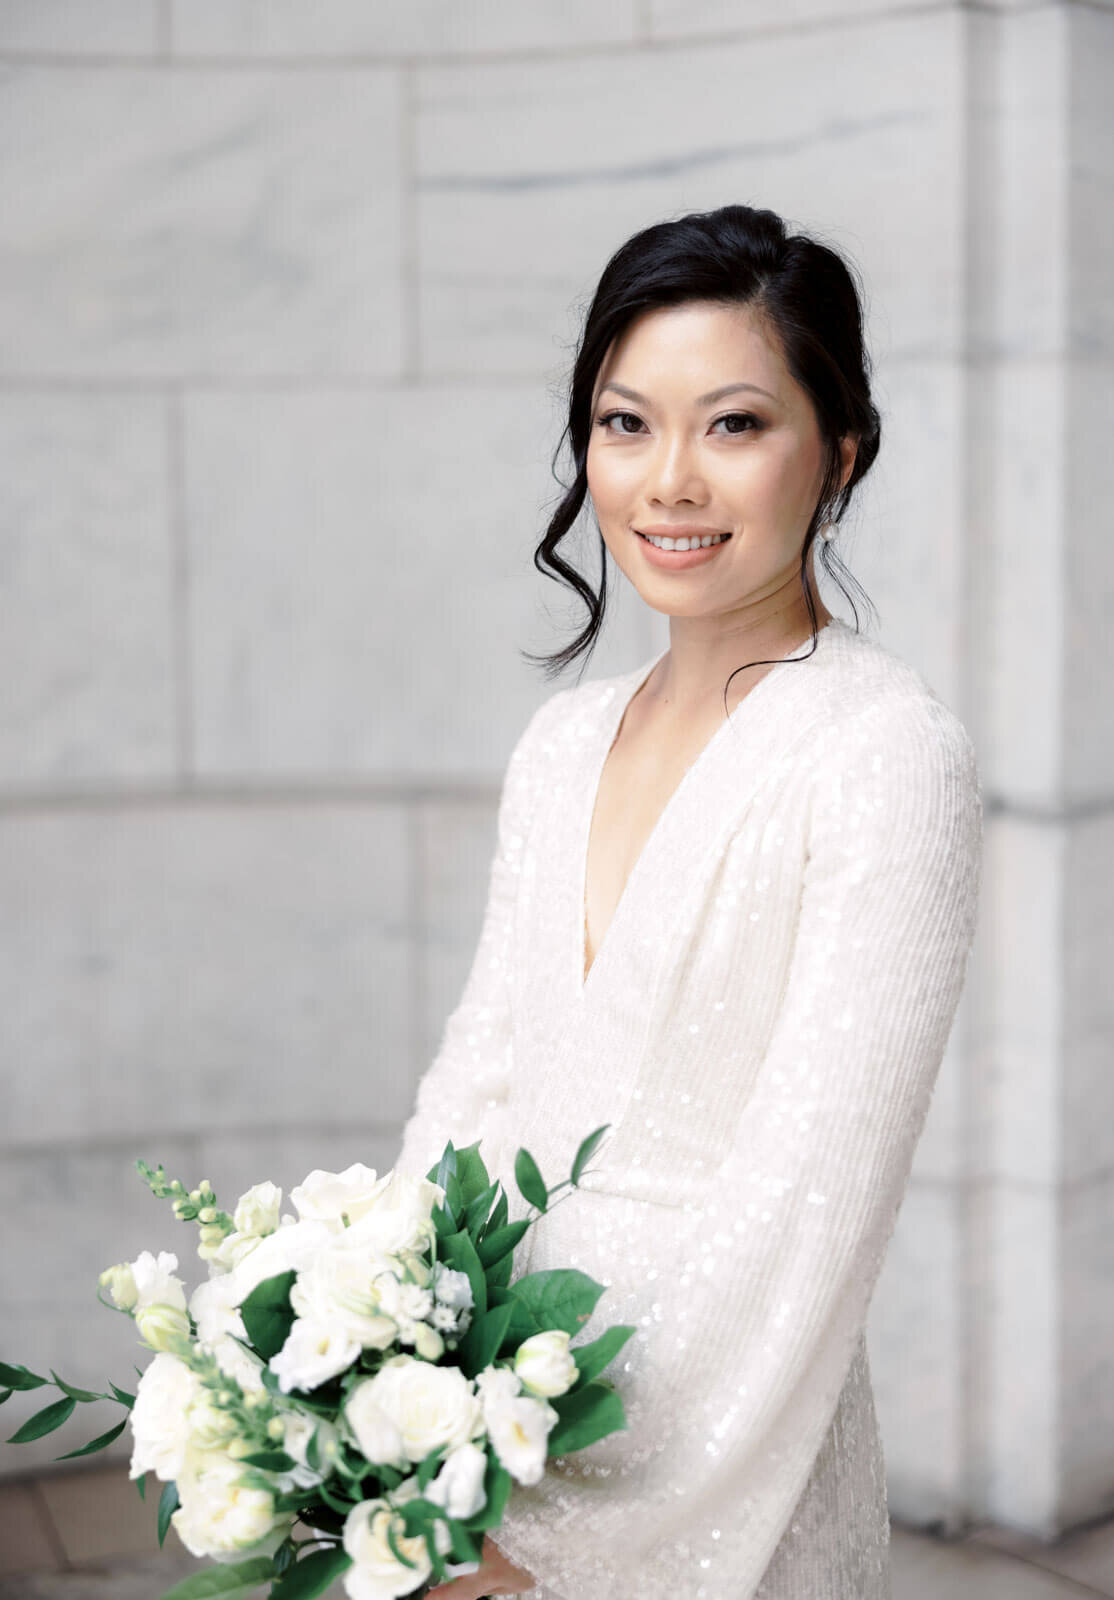 The pretty bride is holding her bouquet of white flowers inside the New York Public Library, NYC. Image by Jenny Fu Studio